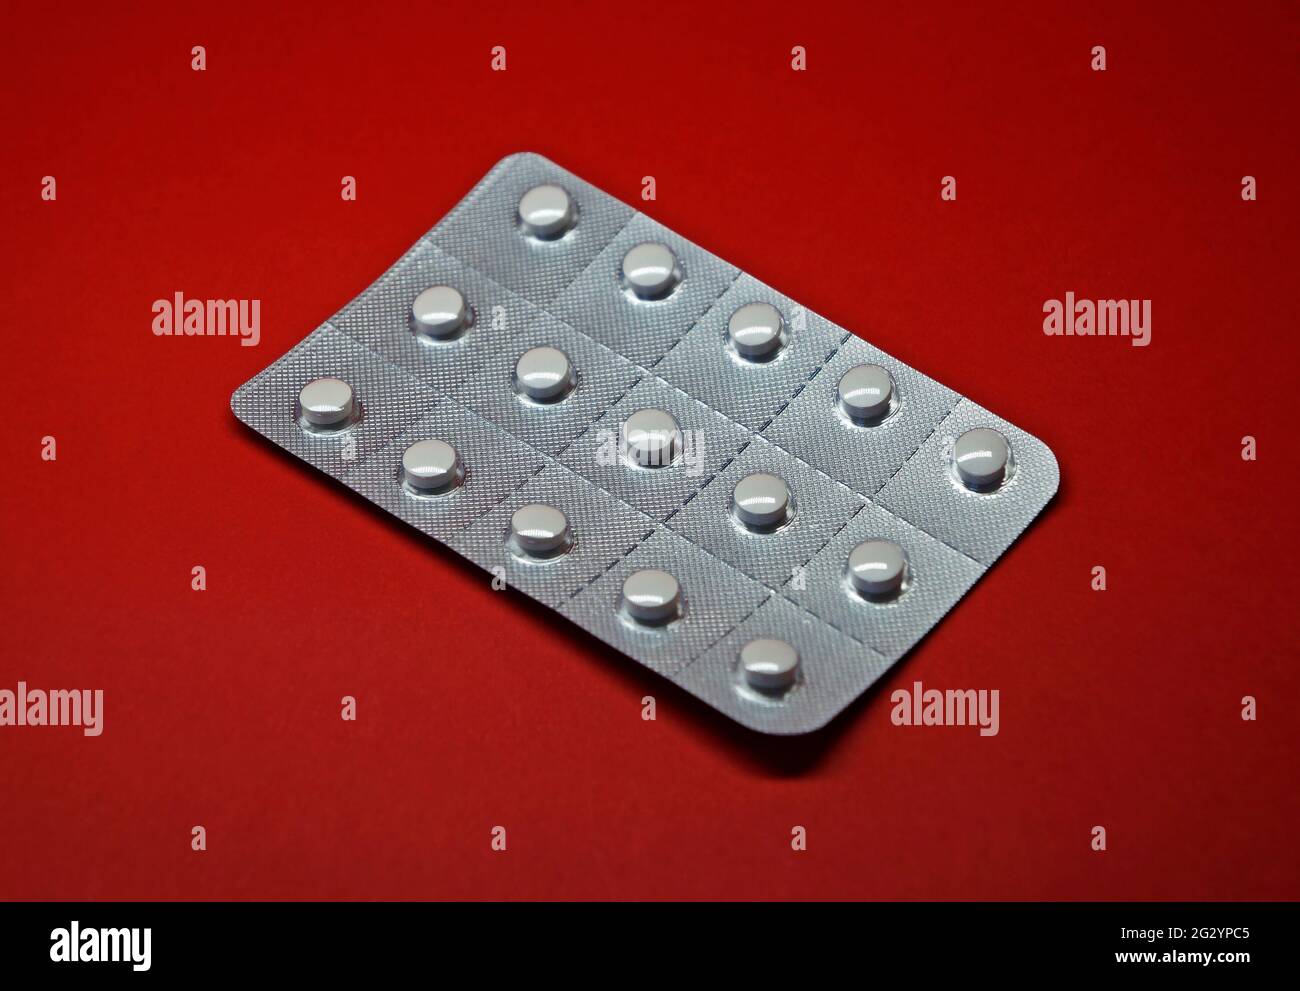 Blister pack of white pills on red background Stock Photo